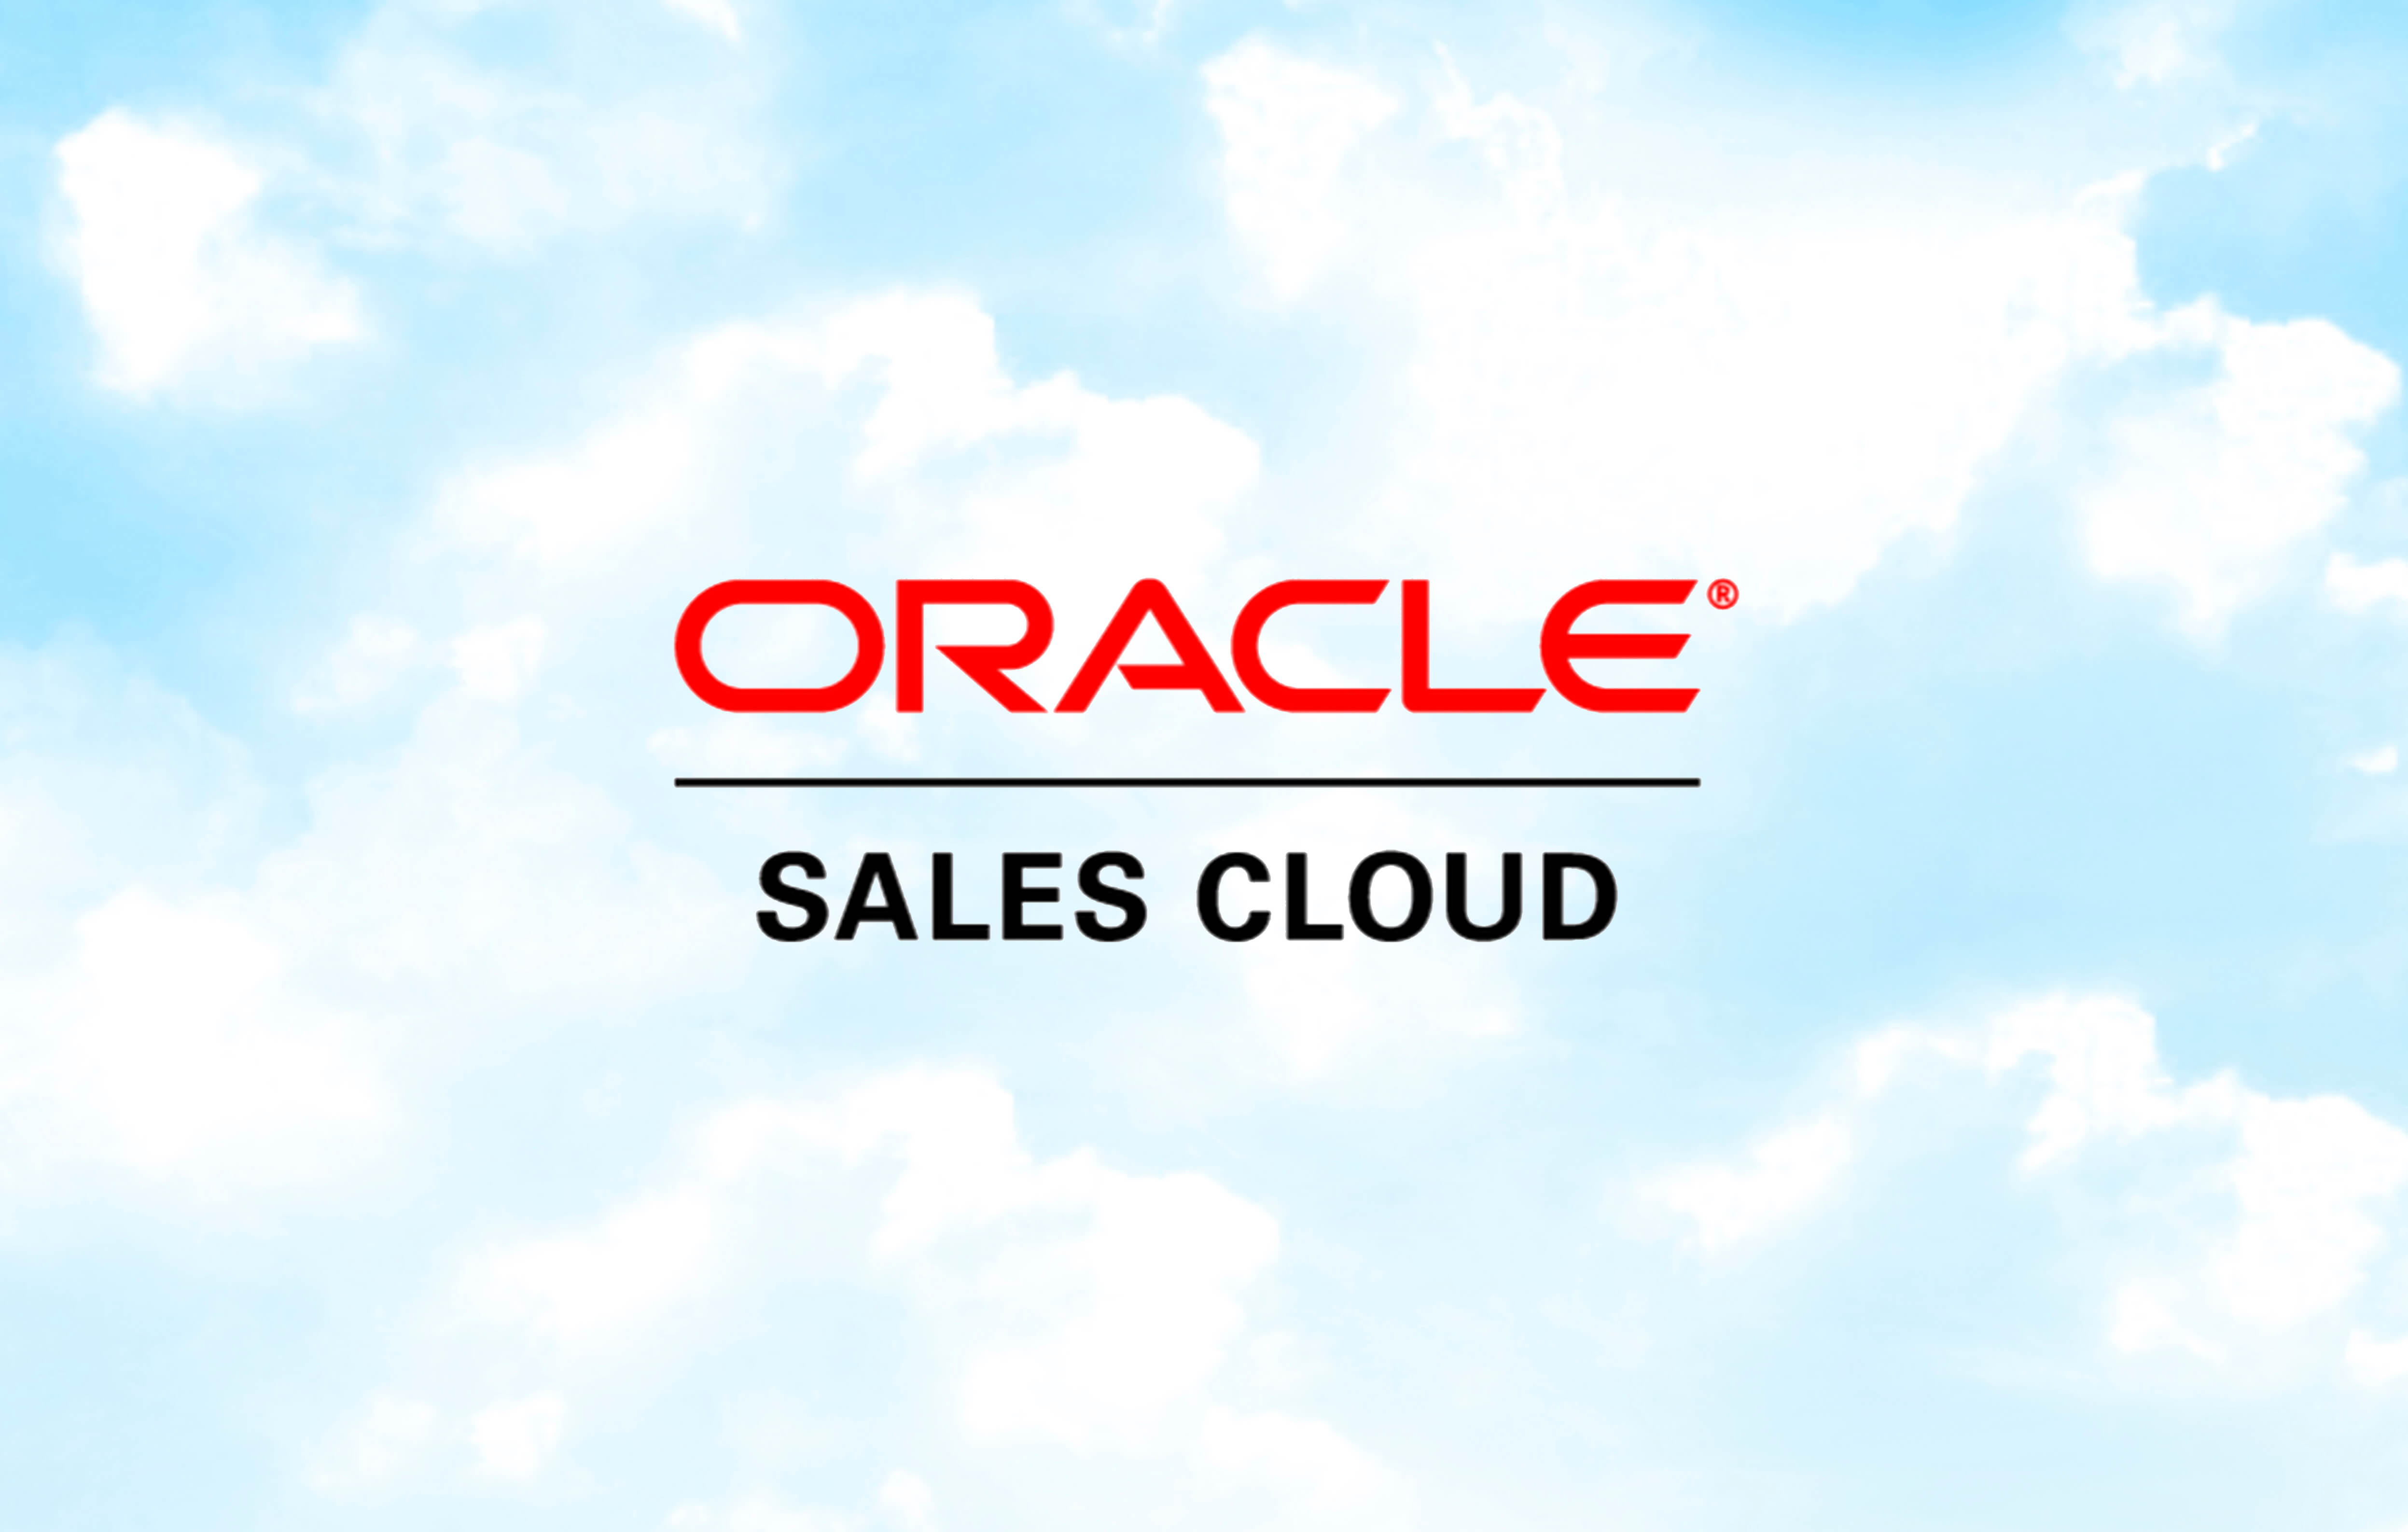 Со company. Oracle sales cloud. Sale в облаке. Oracle Financials cloud. Odessey and Oracle.